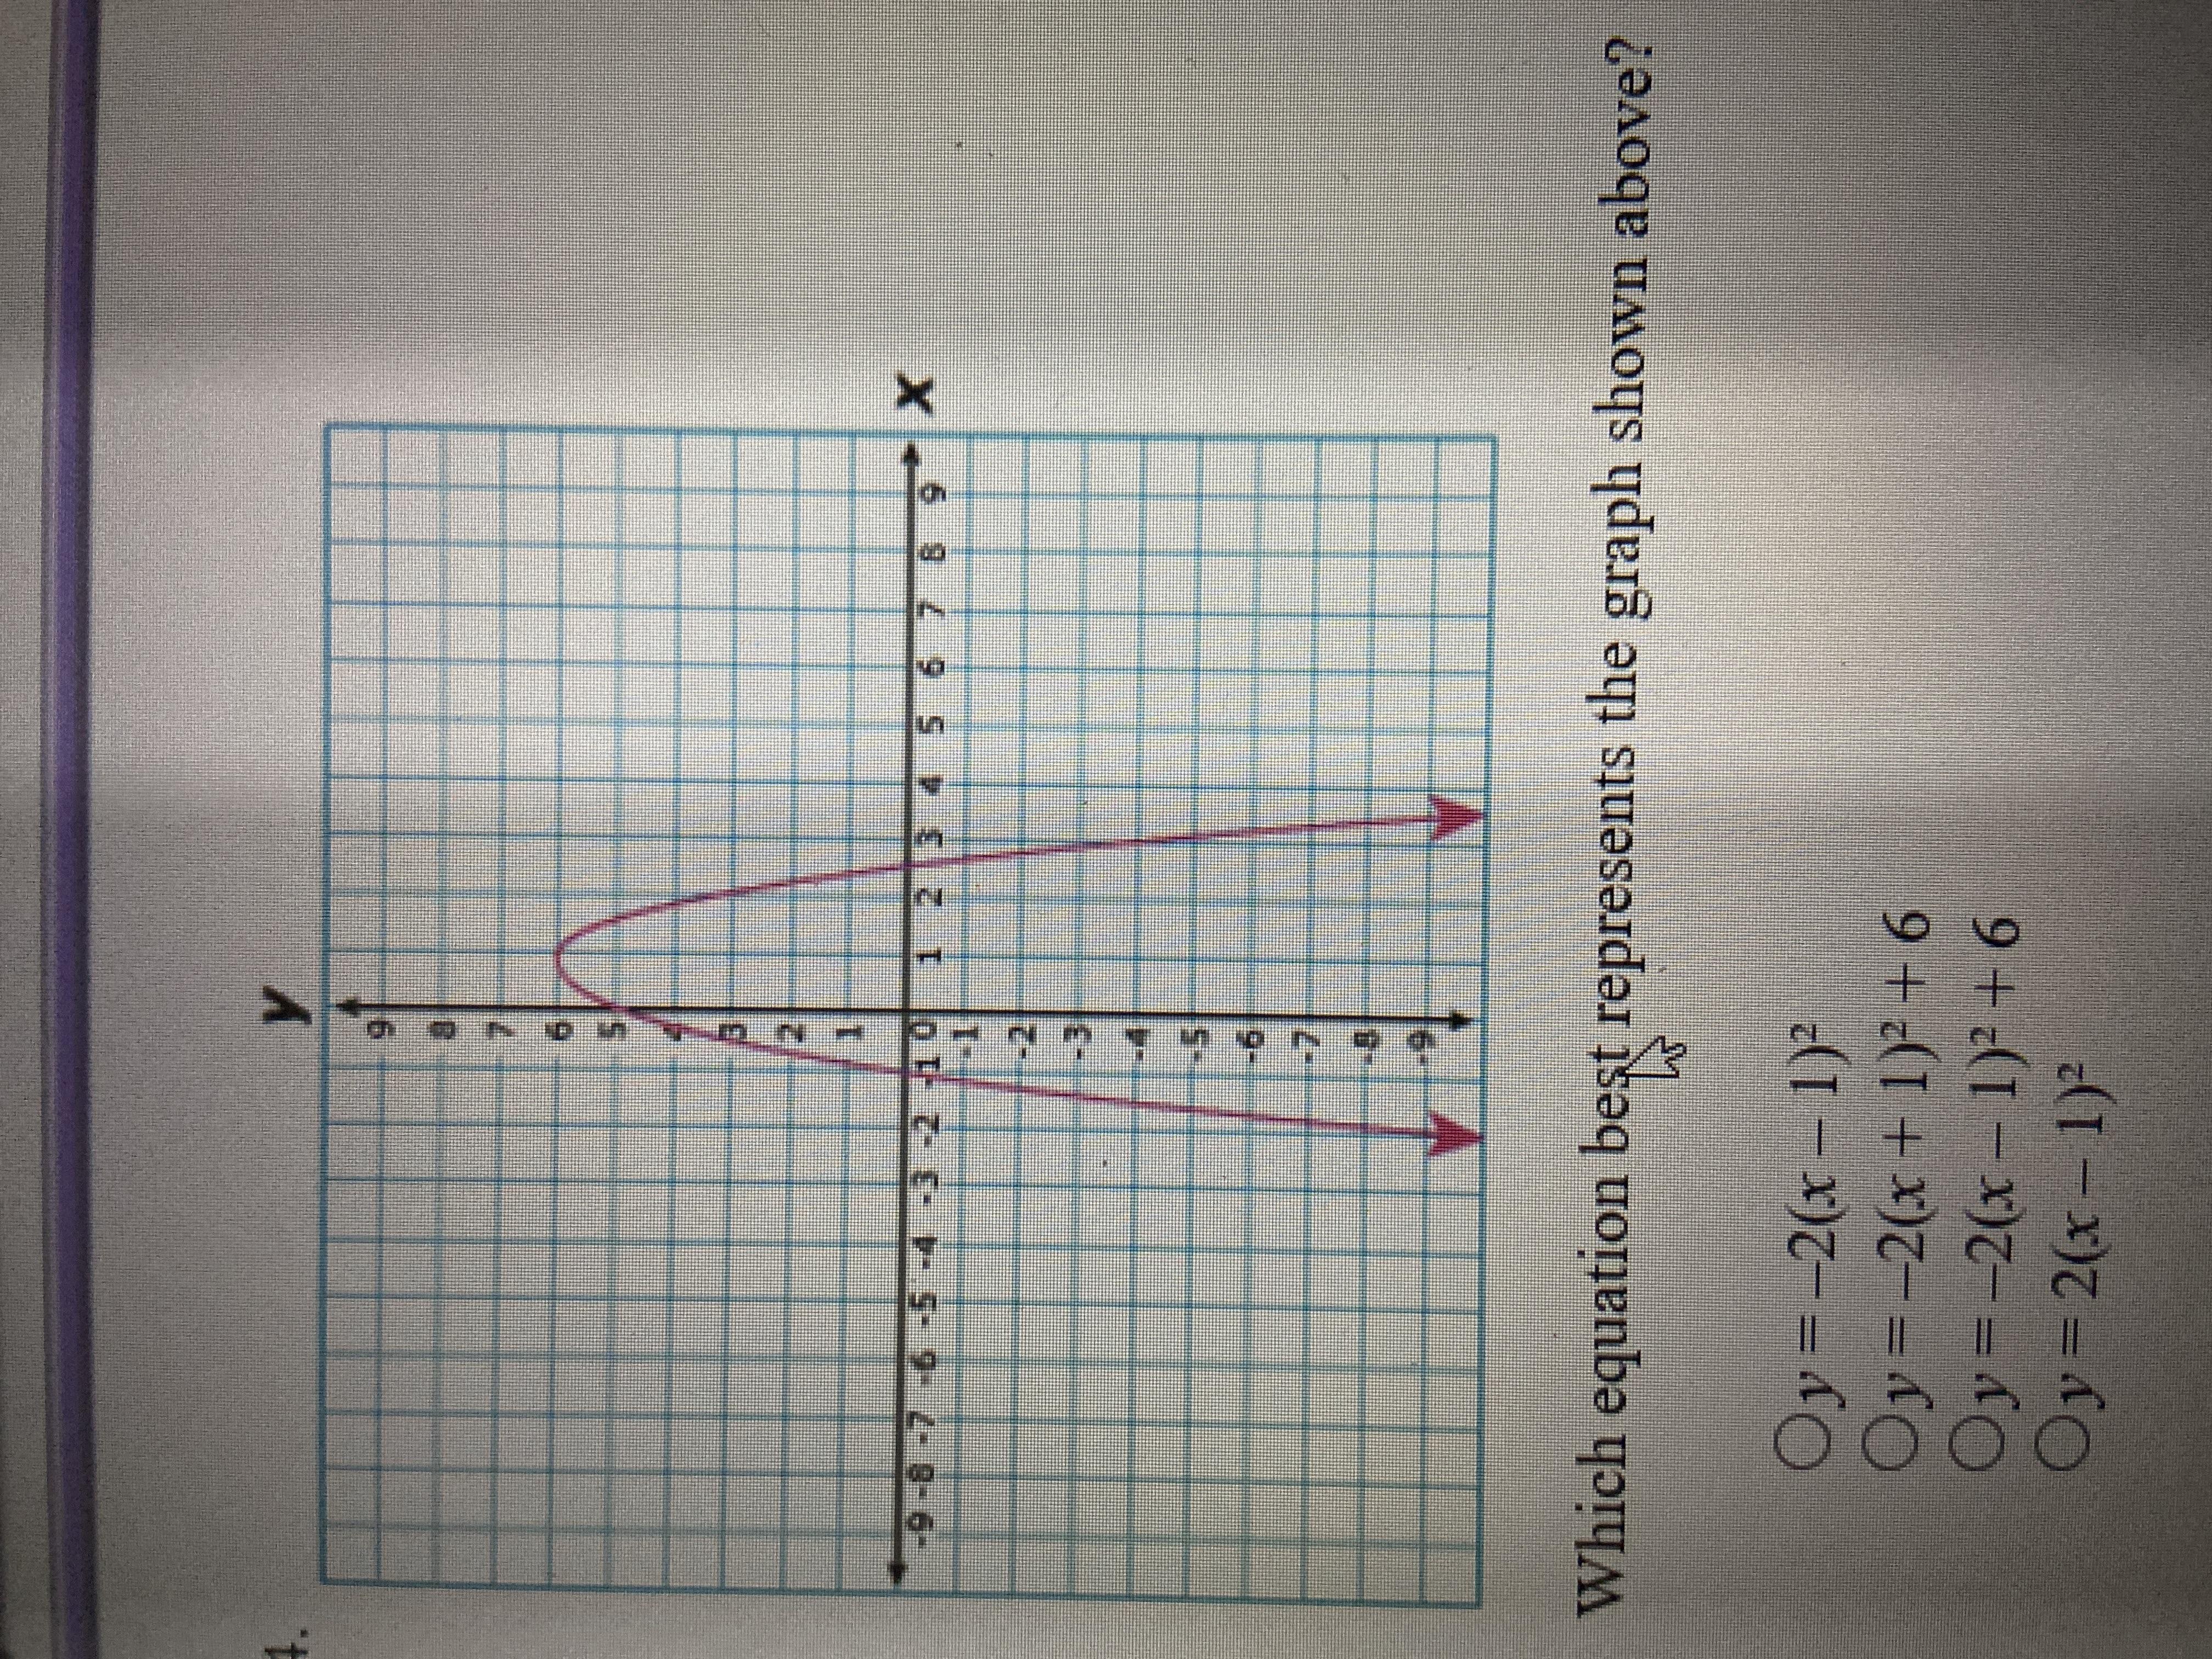 Which Equation Best Represents The Graph Shown Above